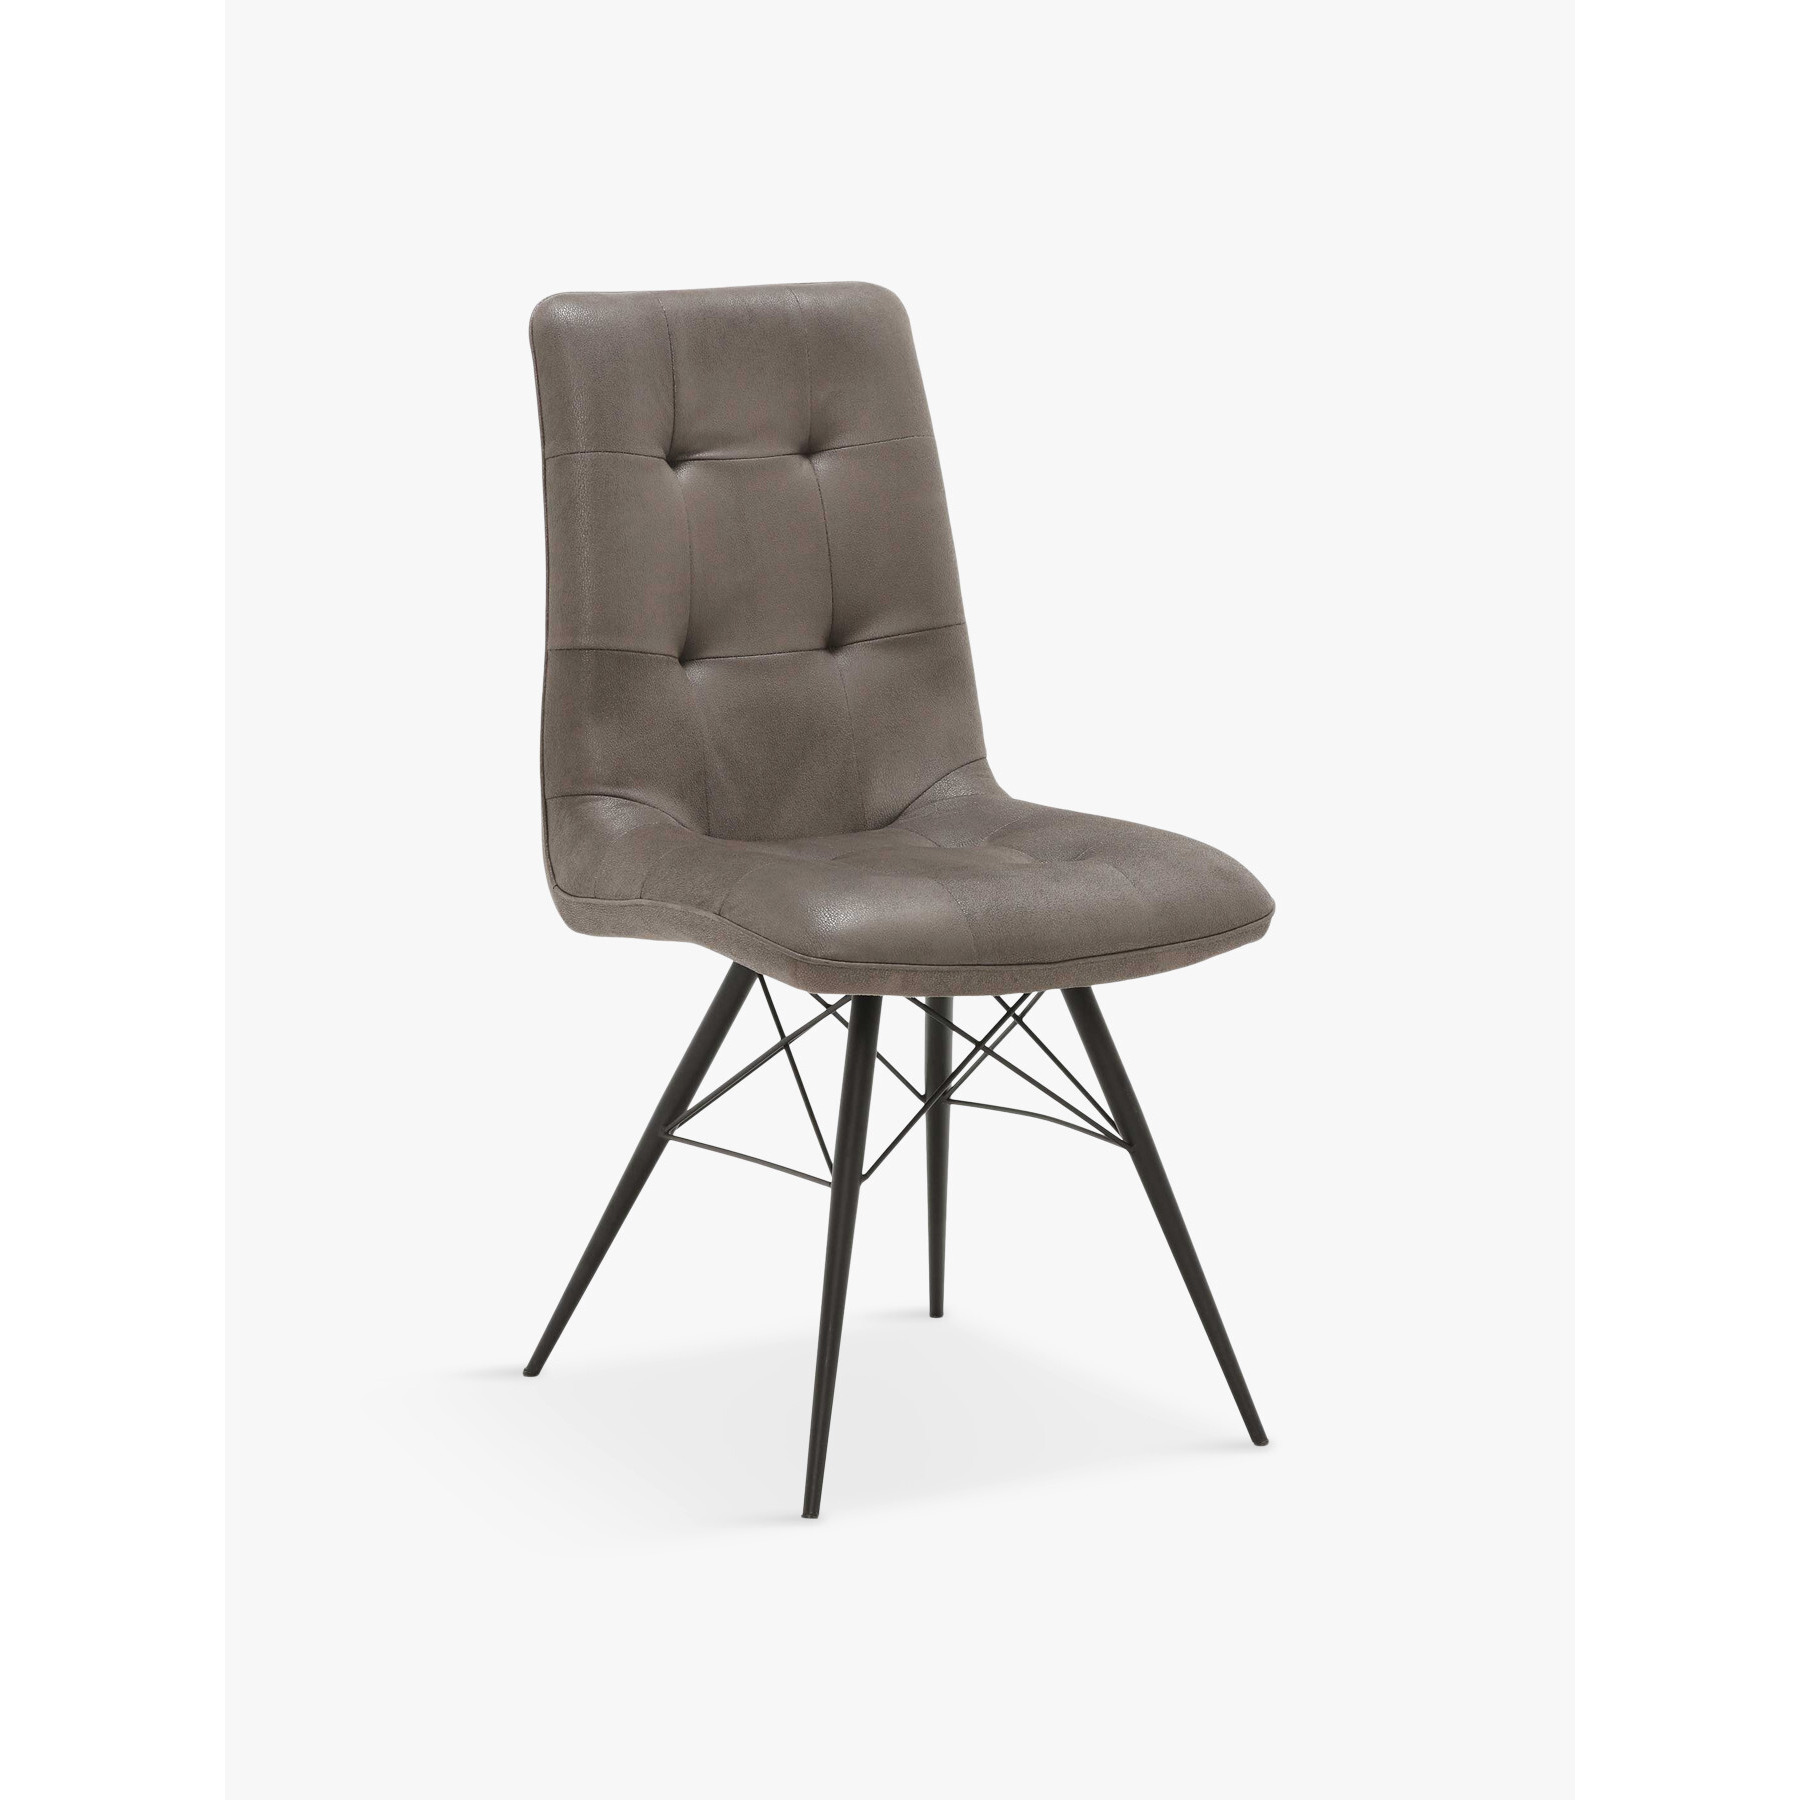 Barker and Stonehouse Hix Upholstered Dining Chair Grey - image 1